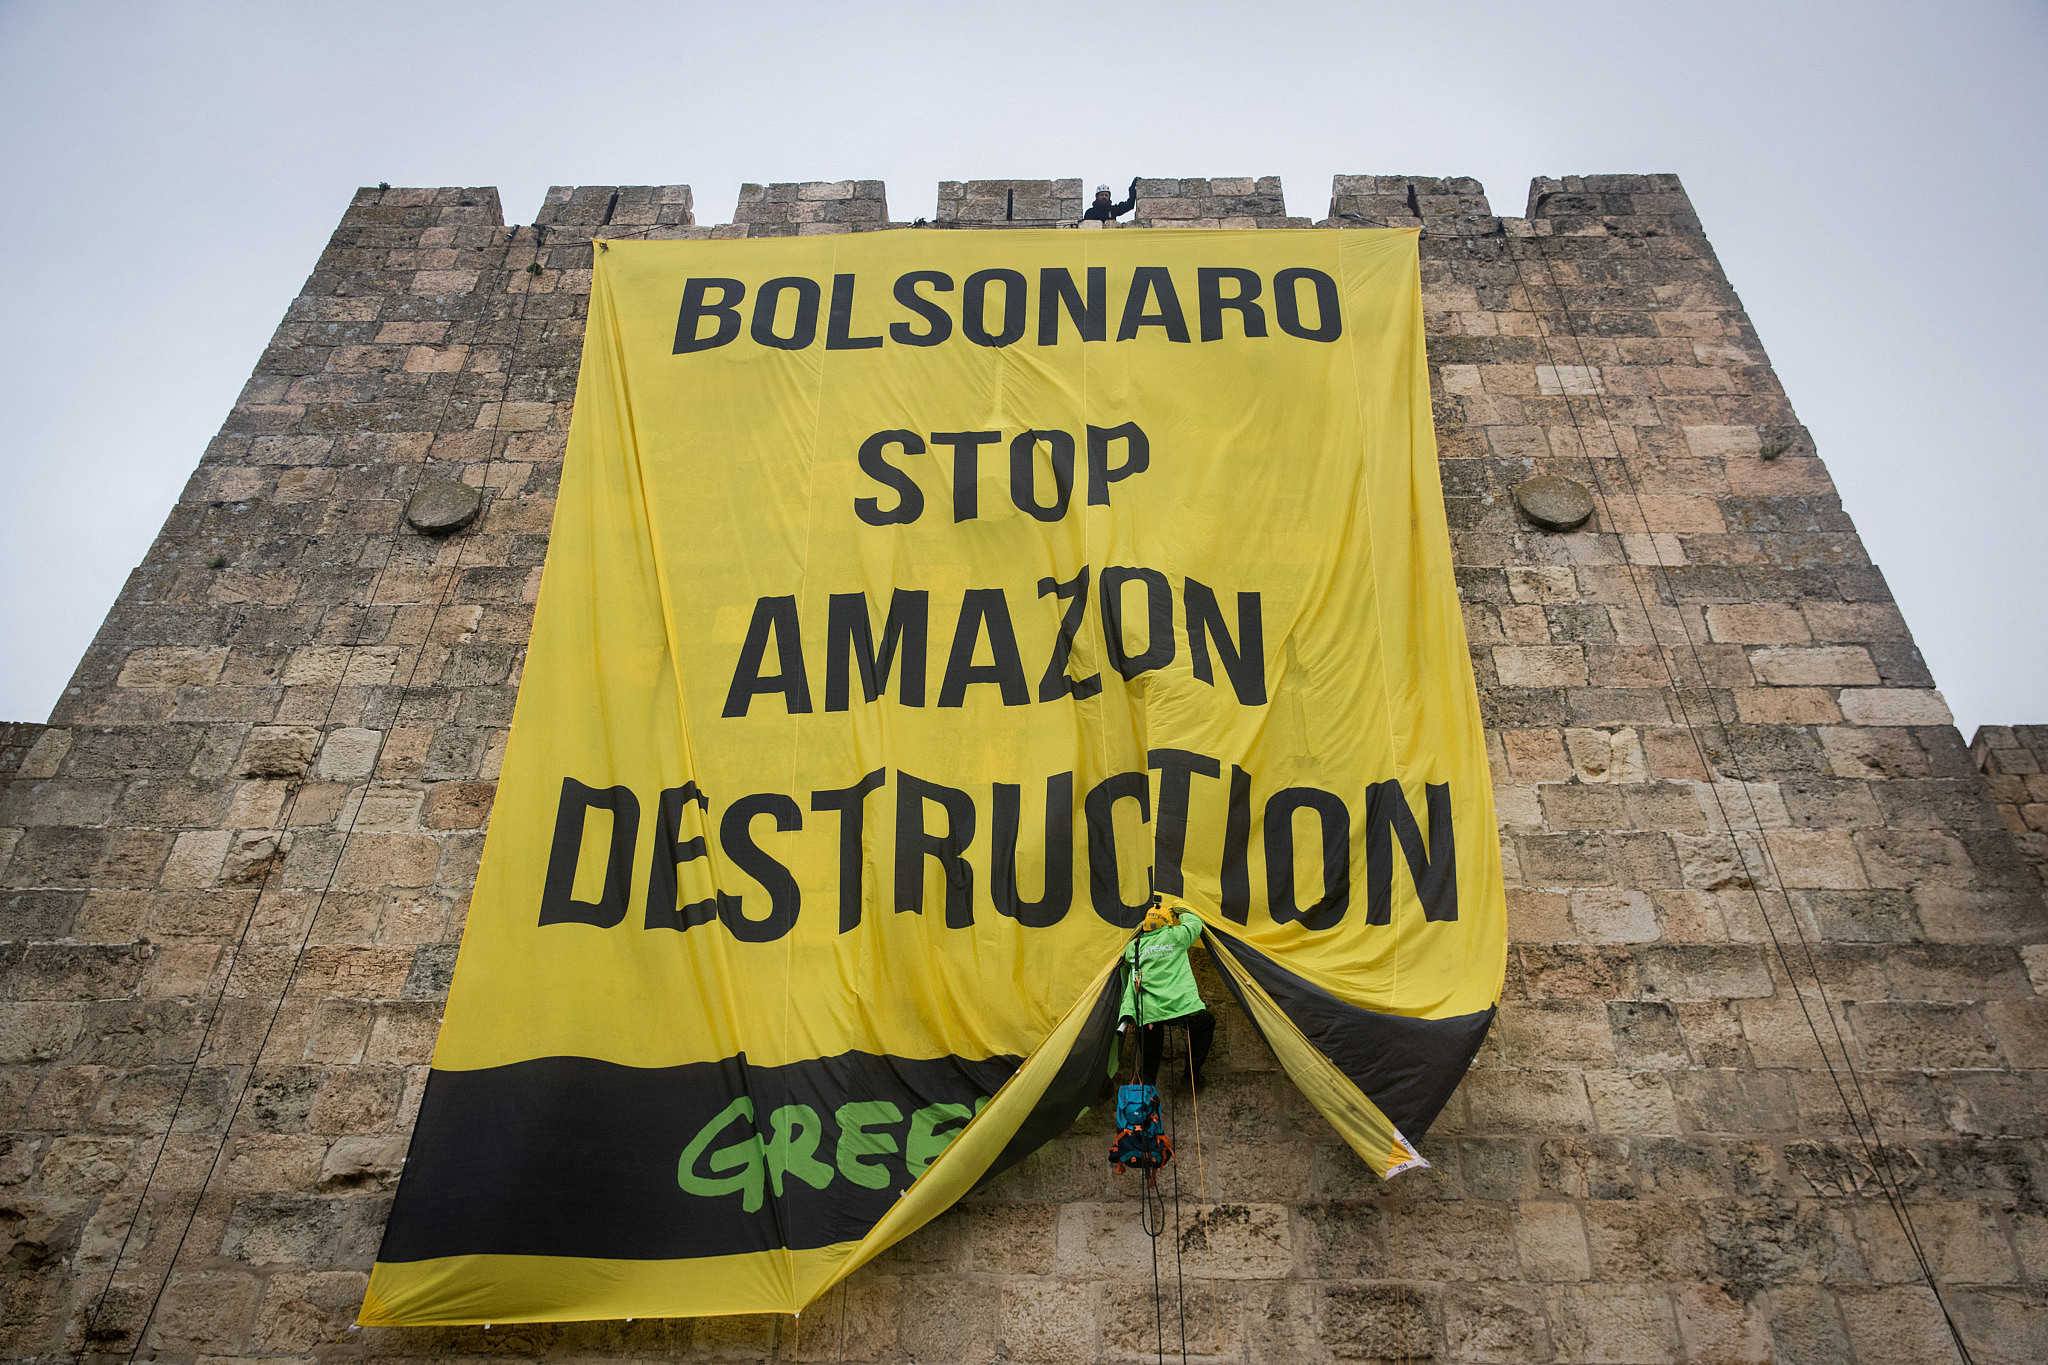 Green Peace activists rappelling down the walls of the Jerusalem Old City to hang a banner during a protest of the visit of Brazilian president Jair Bolsonaro in Israel, April 1, 2019. (Yonatan Sindel/Flash90)